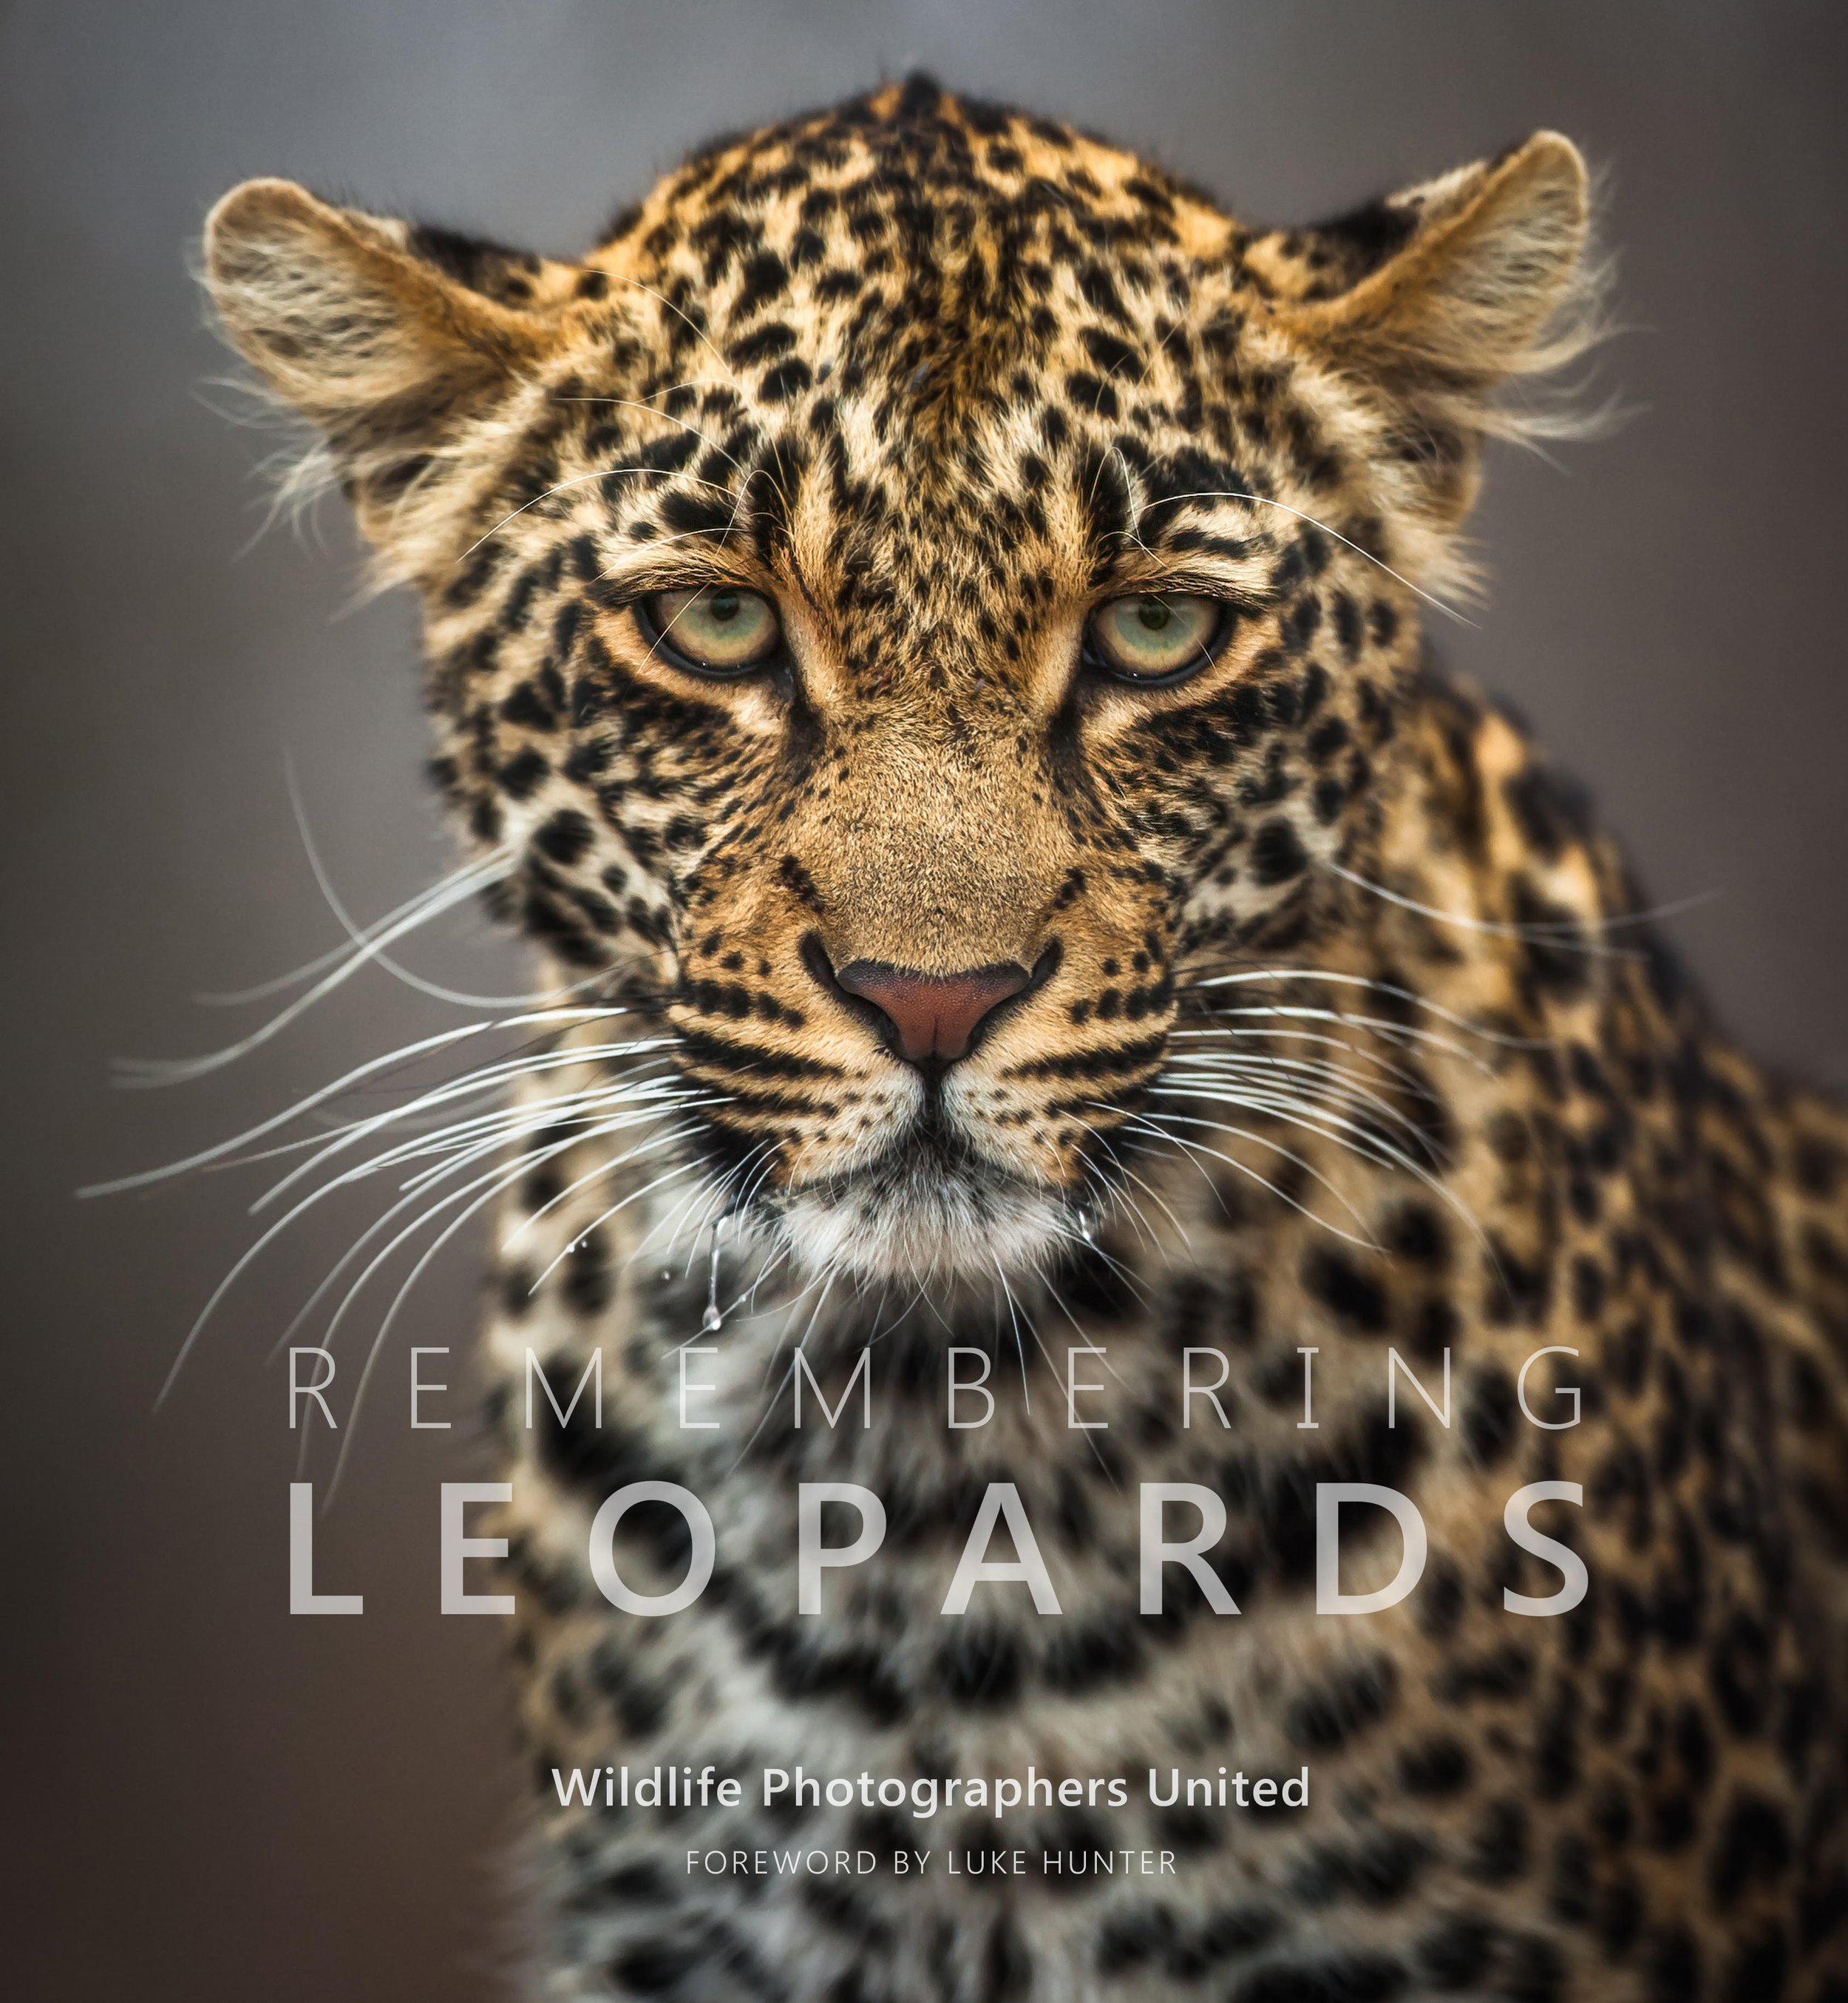 Remembering Leopards is the stunning eighth book in the Remembering Wildlife charity series. (Copy) (Copy) (Copy) (Copy) (Copy) (Copy) (Copy) (Copy) (Copy) (Copy)